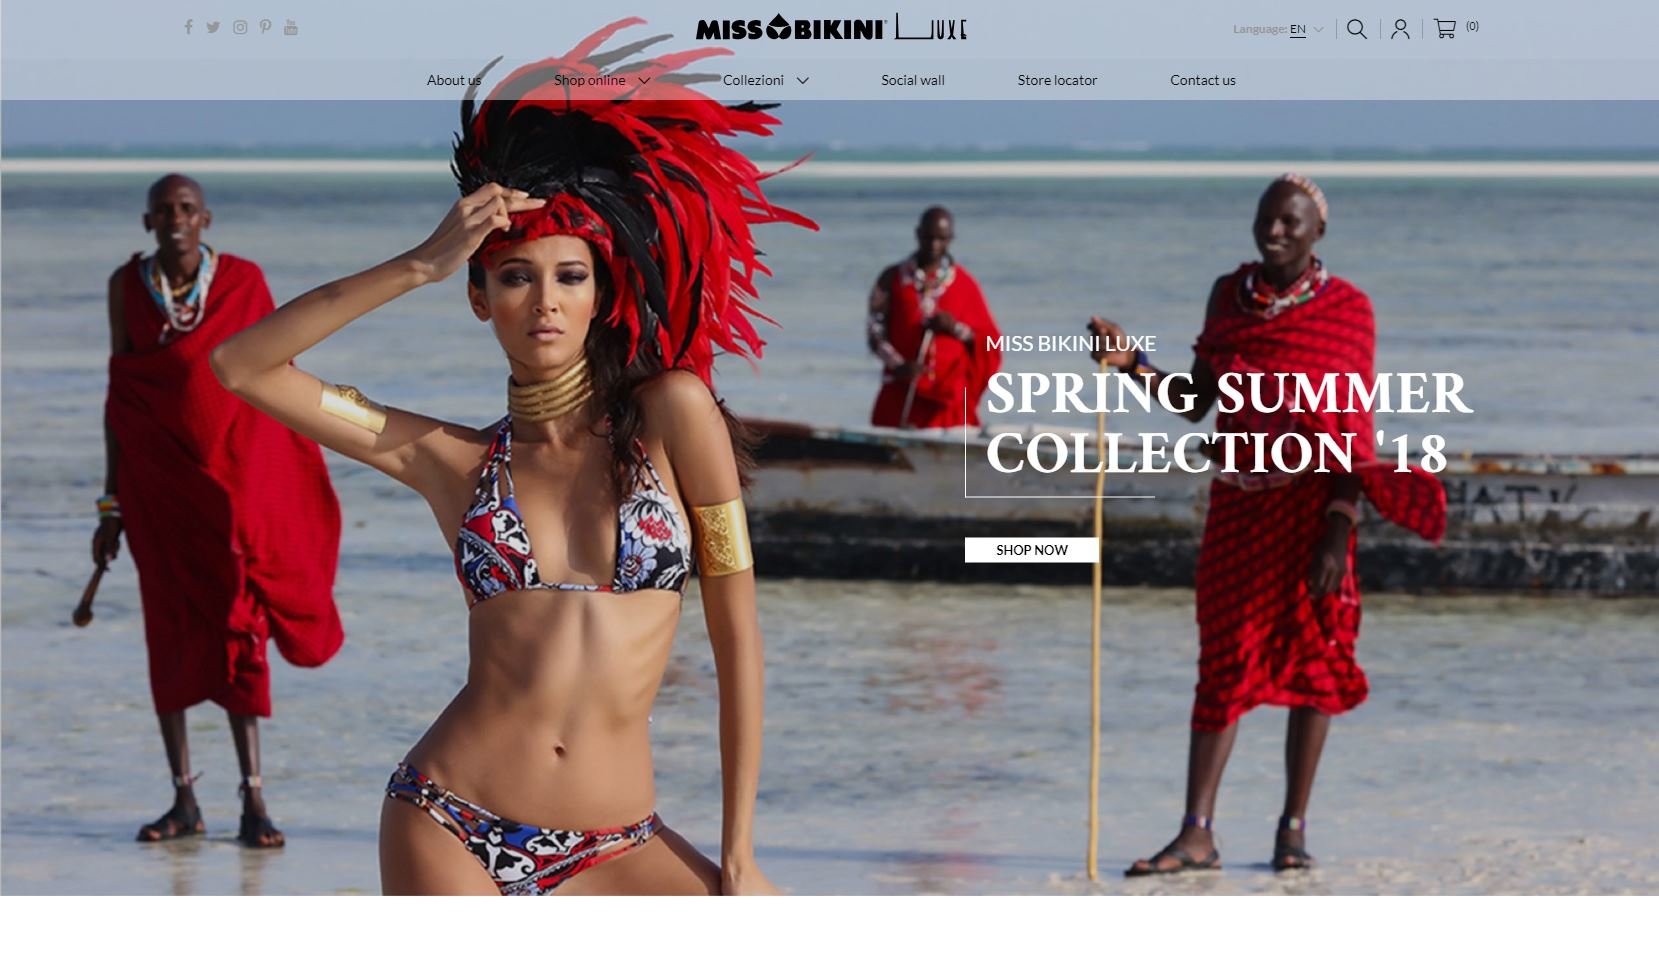 Miss Bikini launches new online store with Kooomo (just in time for swimsuit season!)